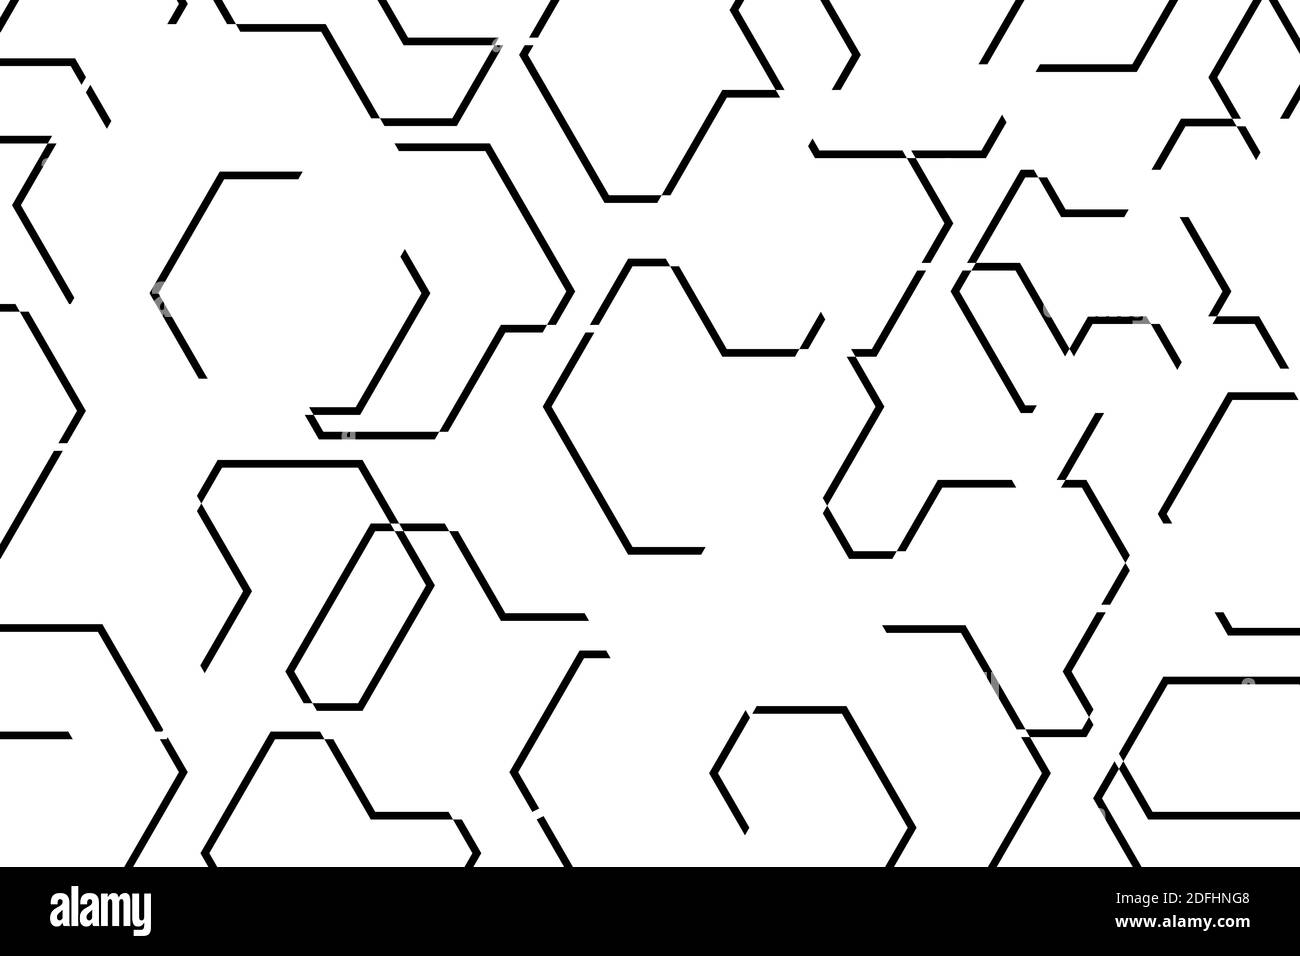 Abstract background pattern made with lines forming organic geometric forms. Modern, simple, minimal vector art. Stock Photo